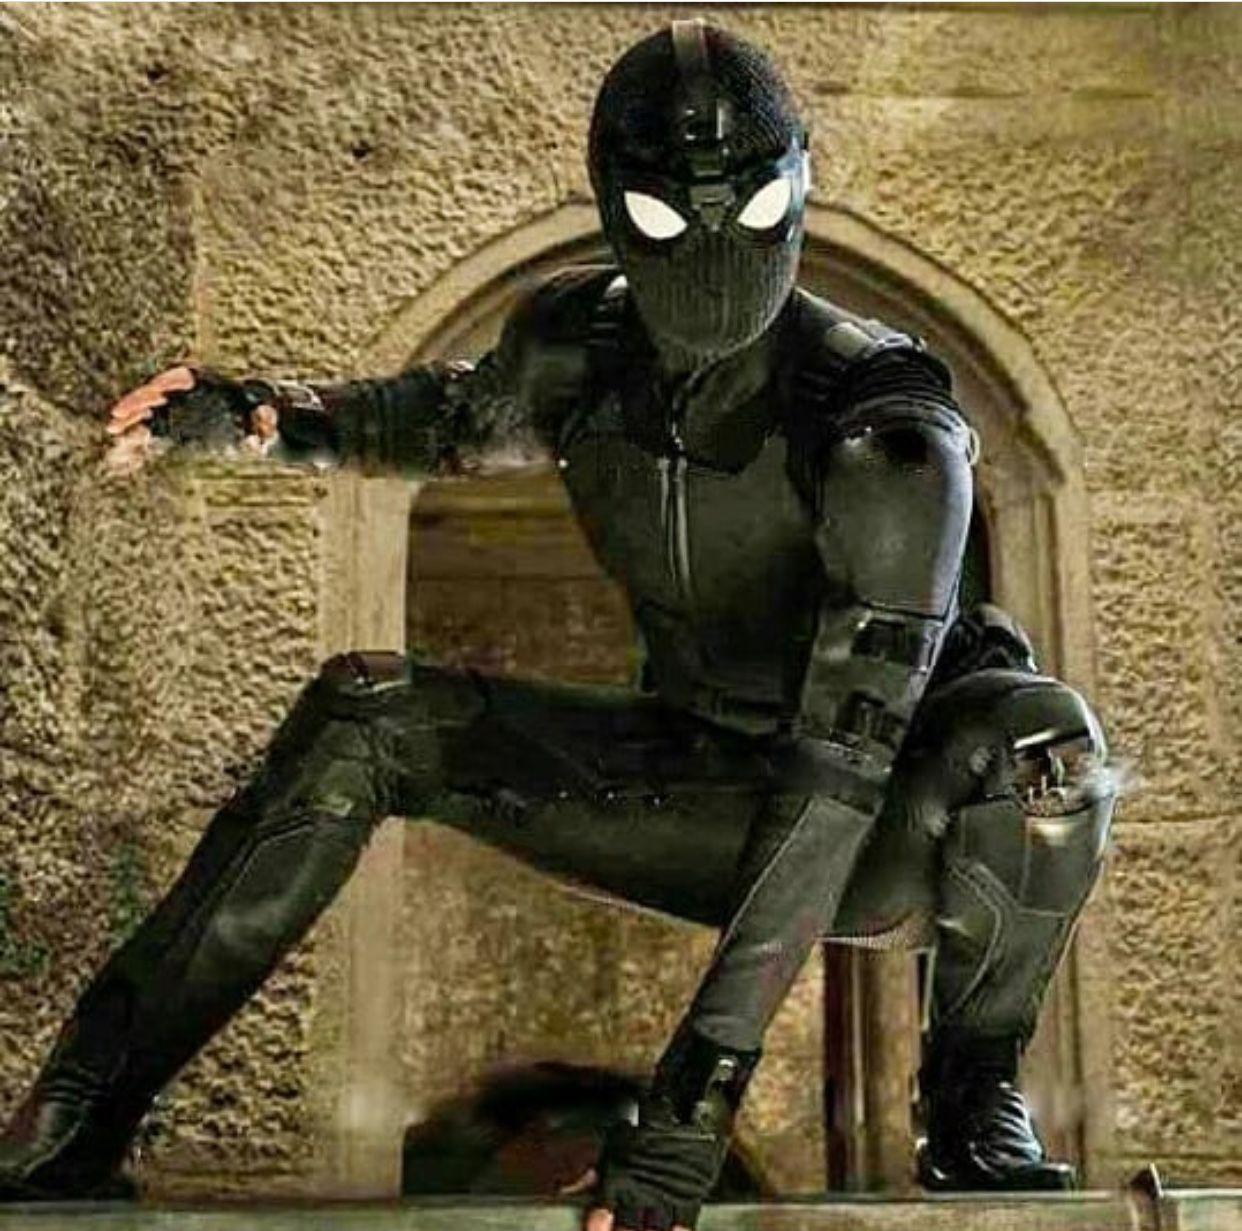 Spider Man Far From Home Stealth Suit! AKA The Comfy Suit According To Tom